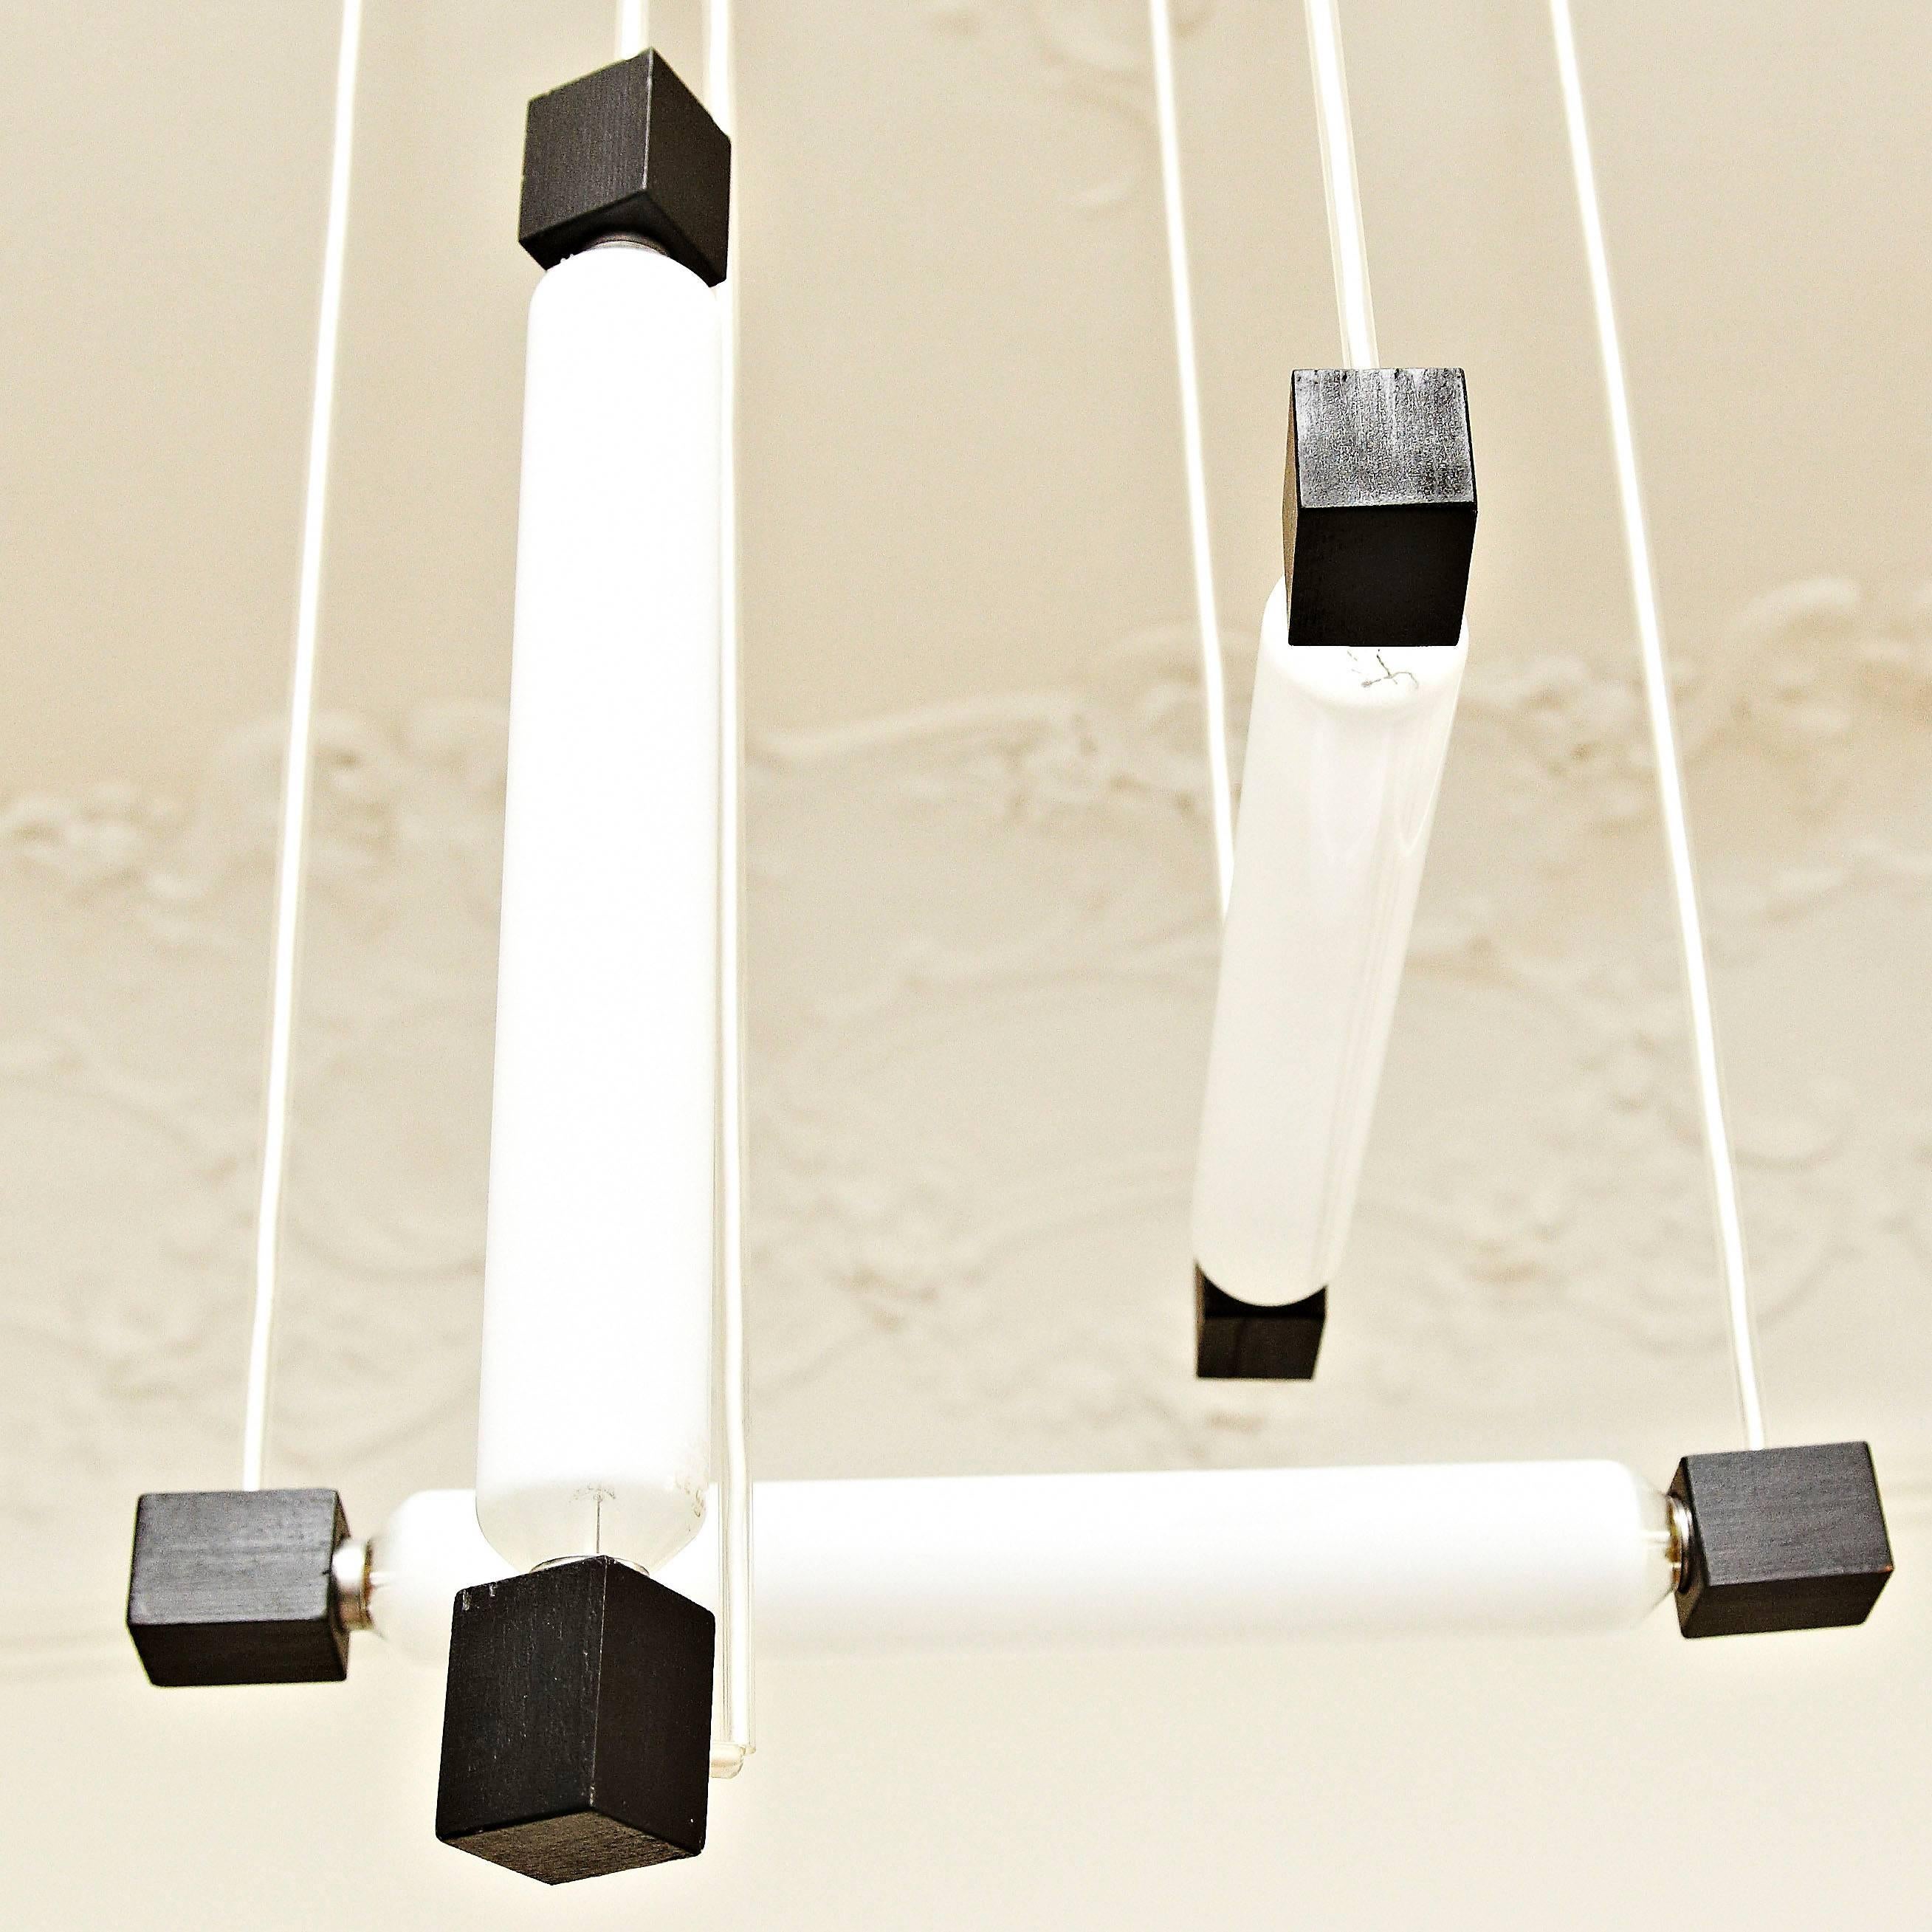 Hanging lamp, designed in the style of Rietveld, executed around 1960 by unknown manufacturer.
Painted wooden structure and plastic tube protecting the electricity cable, with three bulbs.

In good original condition, with minor wear consistent